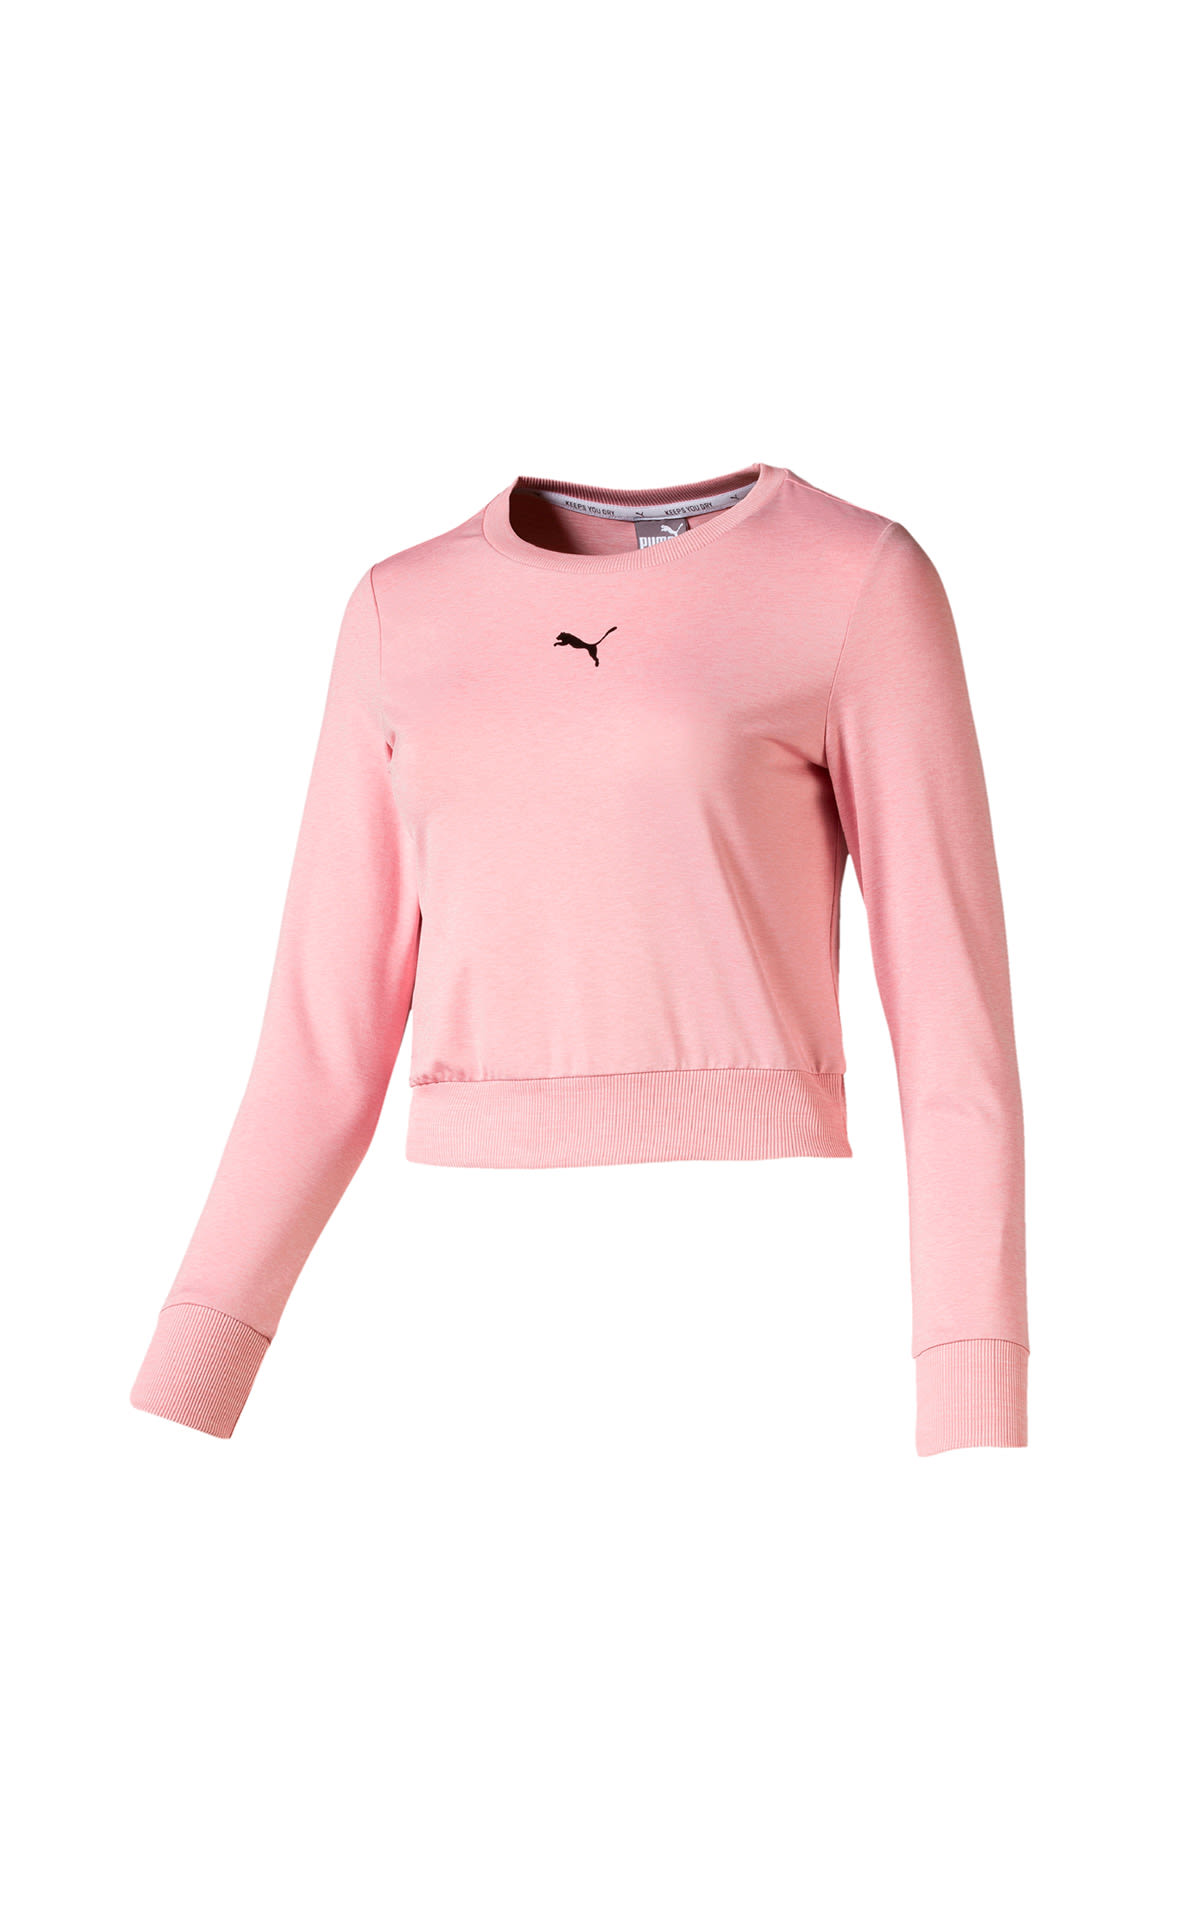 PUMA soft sports long sleeve tee in pink at The Bicester Village Shopping Collection